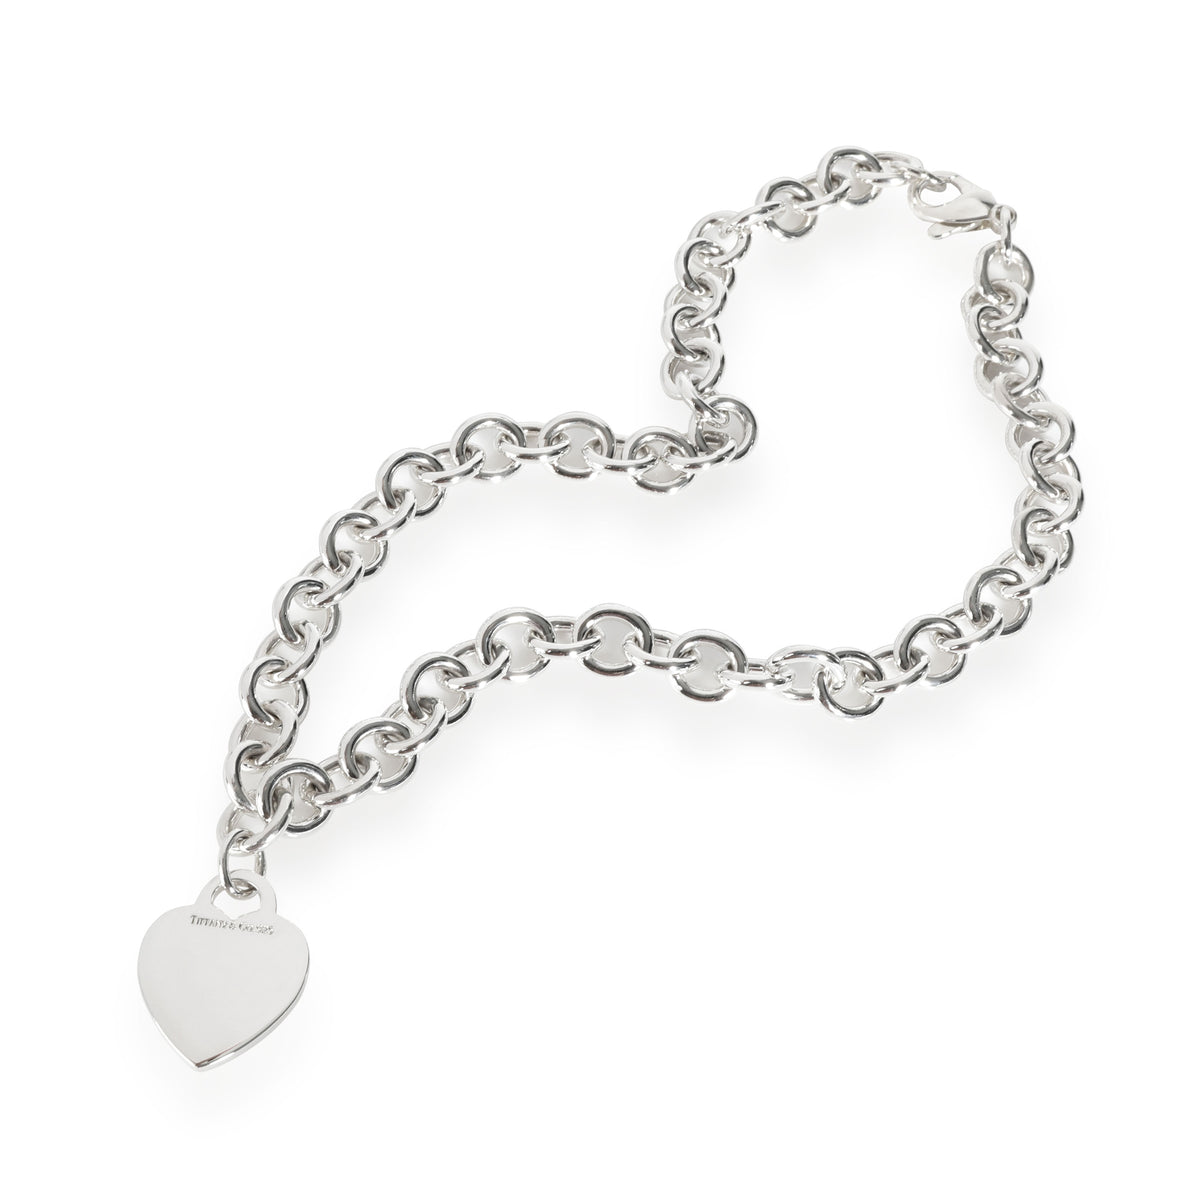 Return to Tiffany® Heart Tag Chain Link Necklace in Silver | Tiffany & Co.